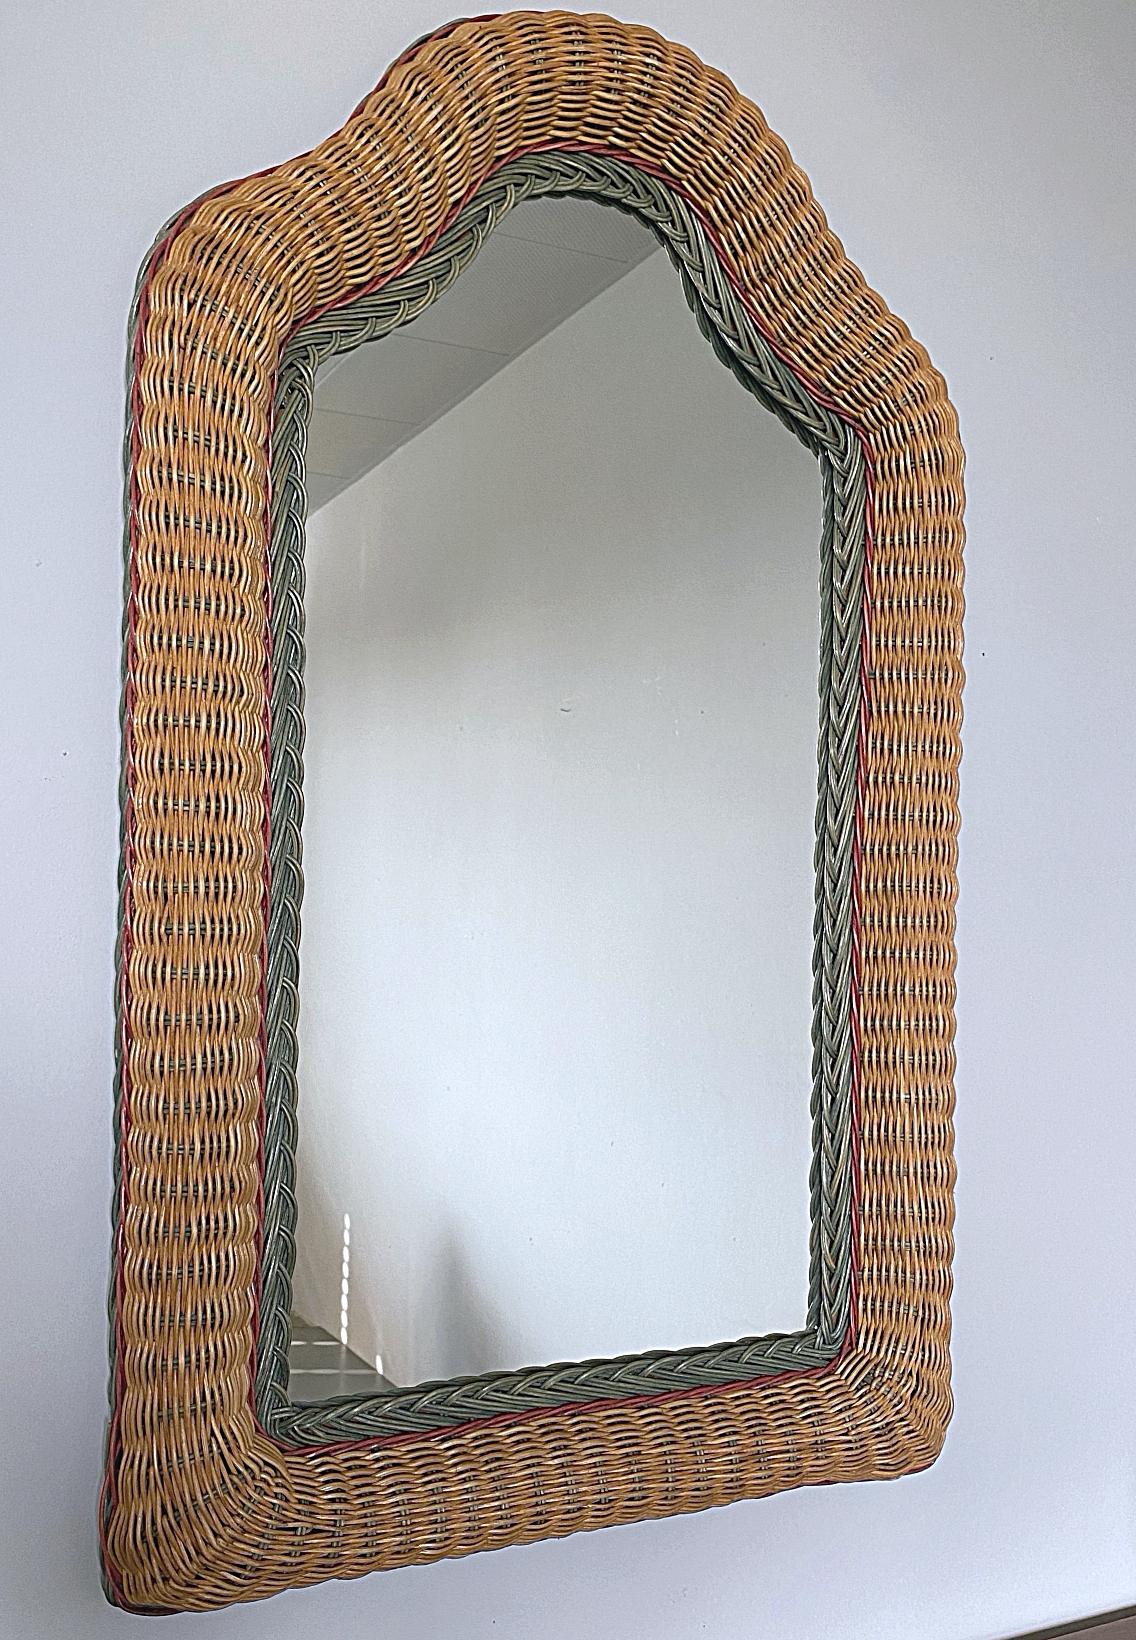 mirror with wicker frame